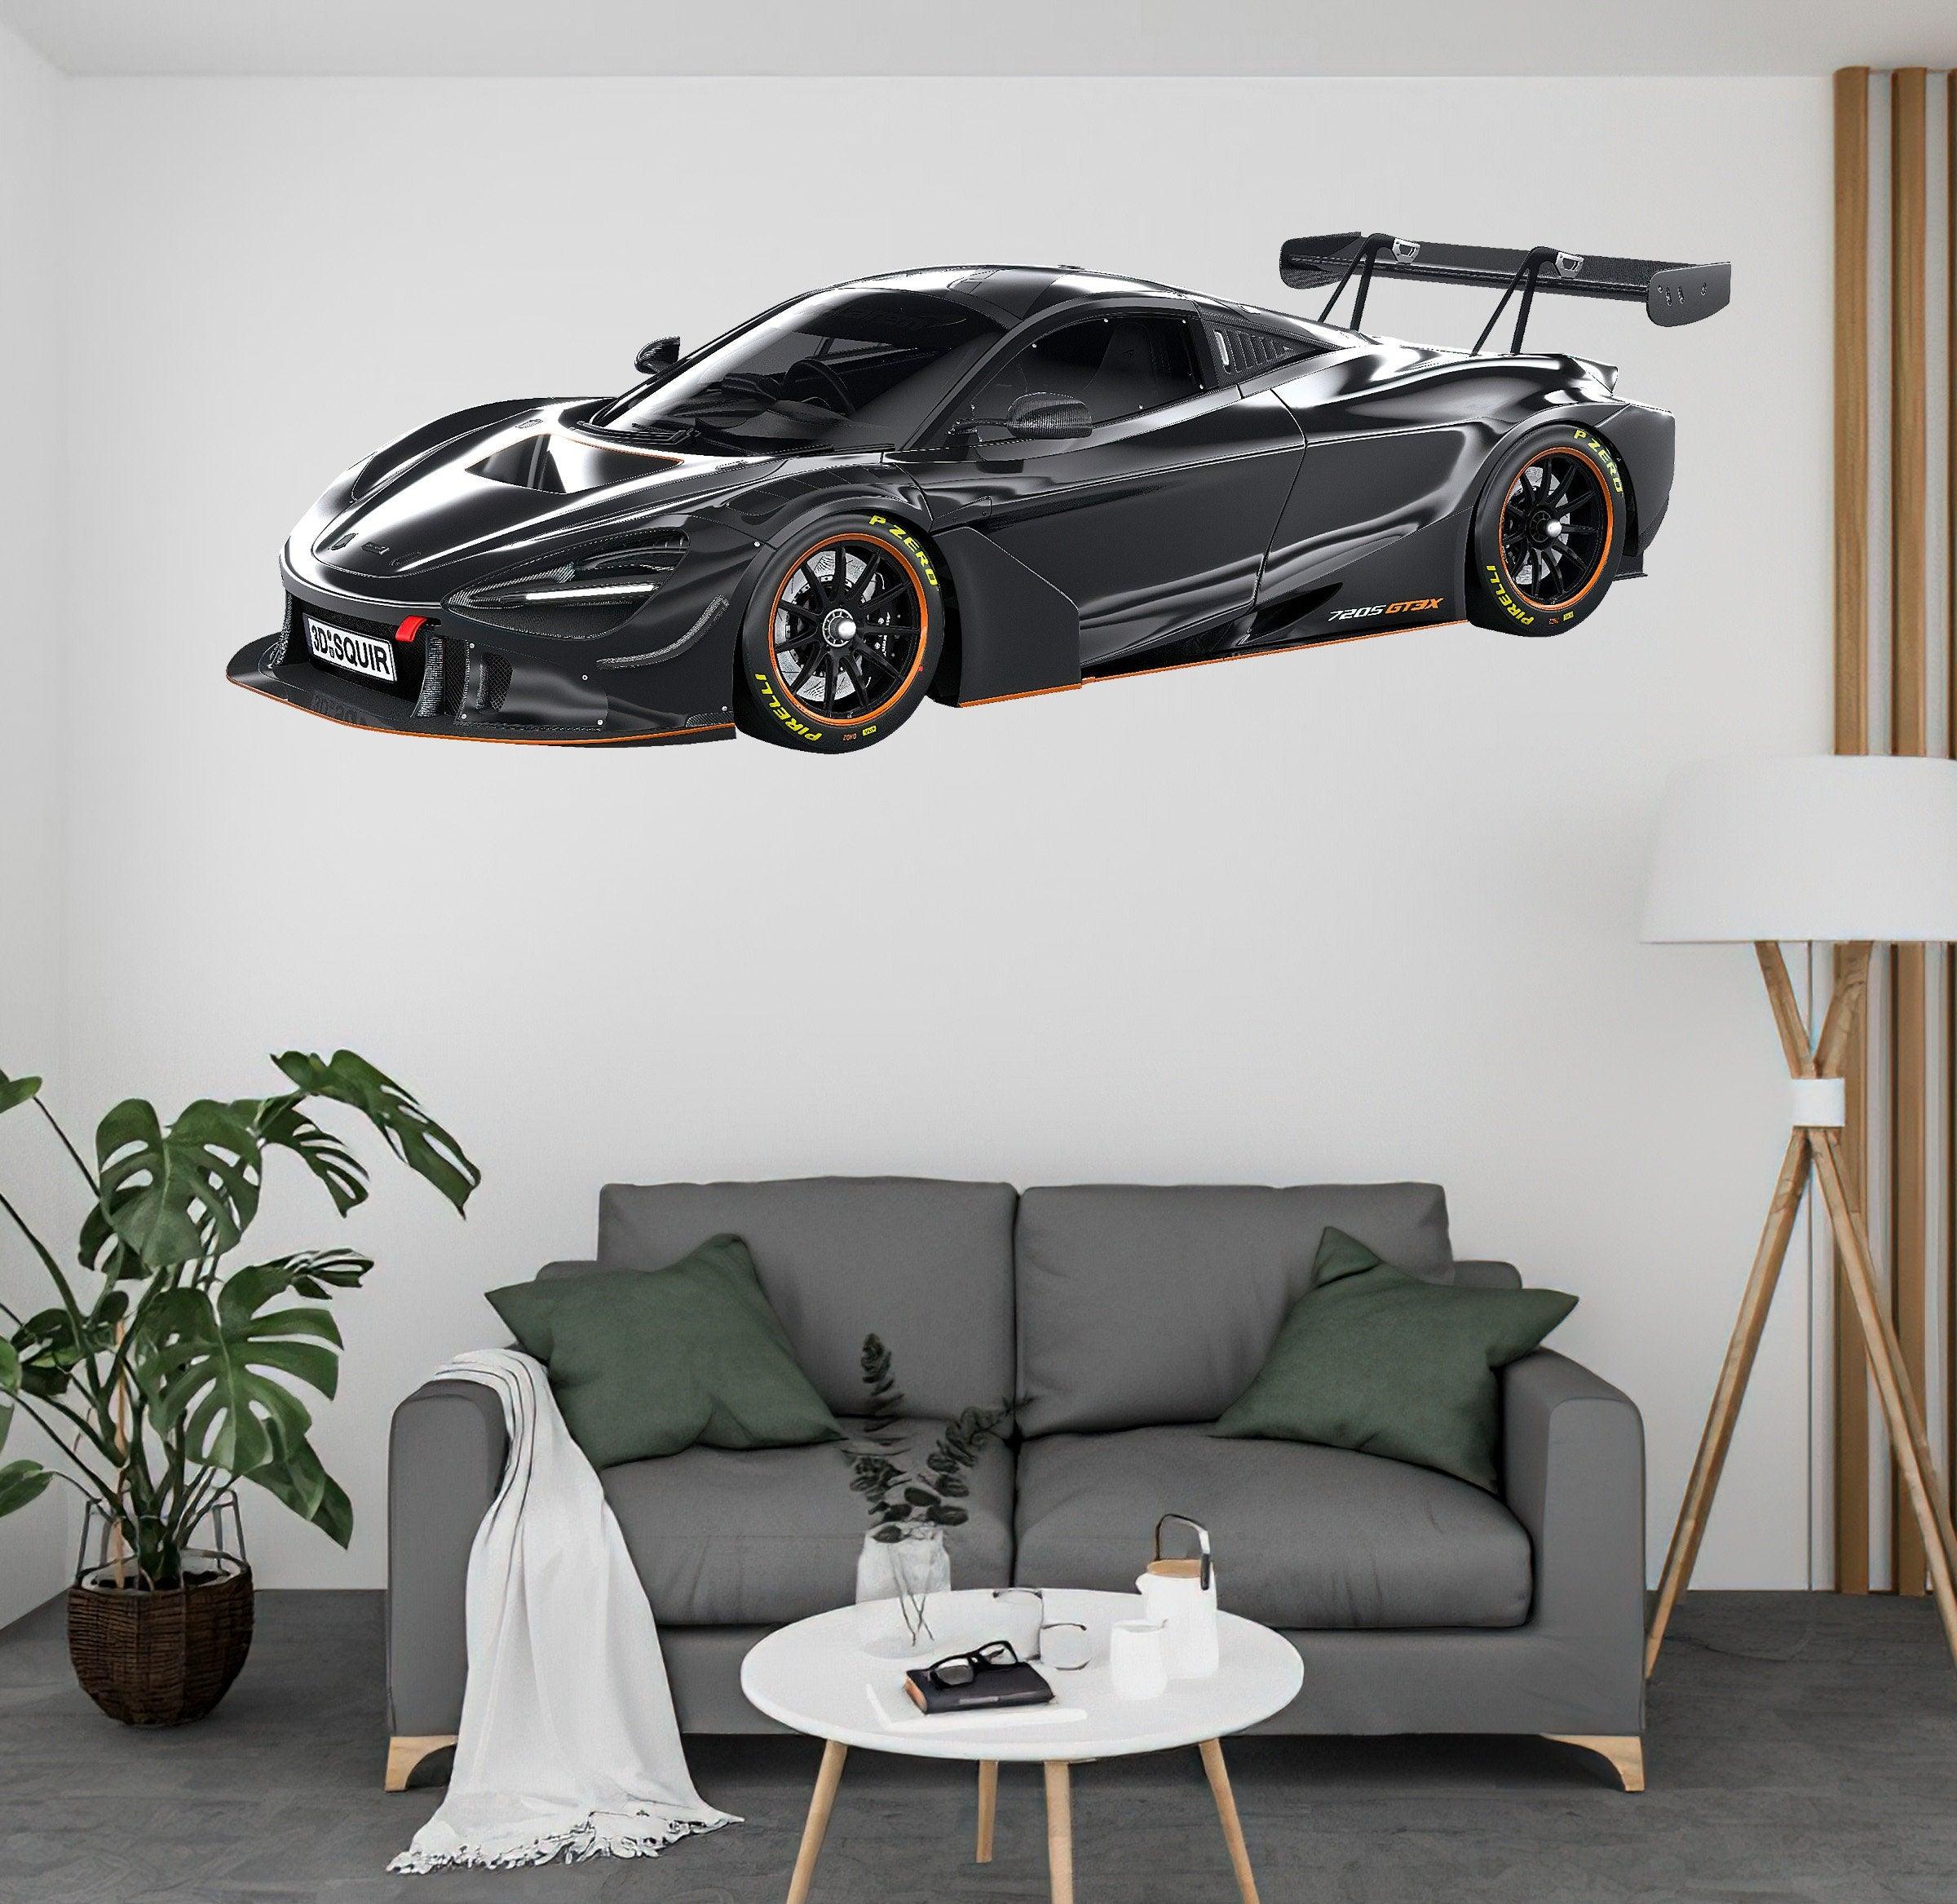 Mclaren 720s gt3x 2021 Wall Decal Luxury Hyper Exotic Sports Car Removable Fabric Wall Sticker Boys Bedroom Man Cave Wall Art Decor